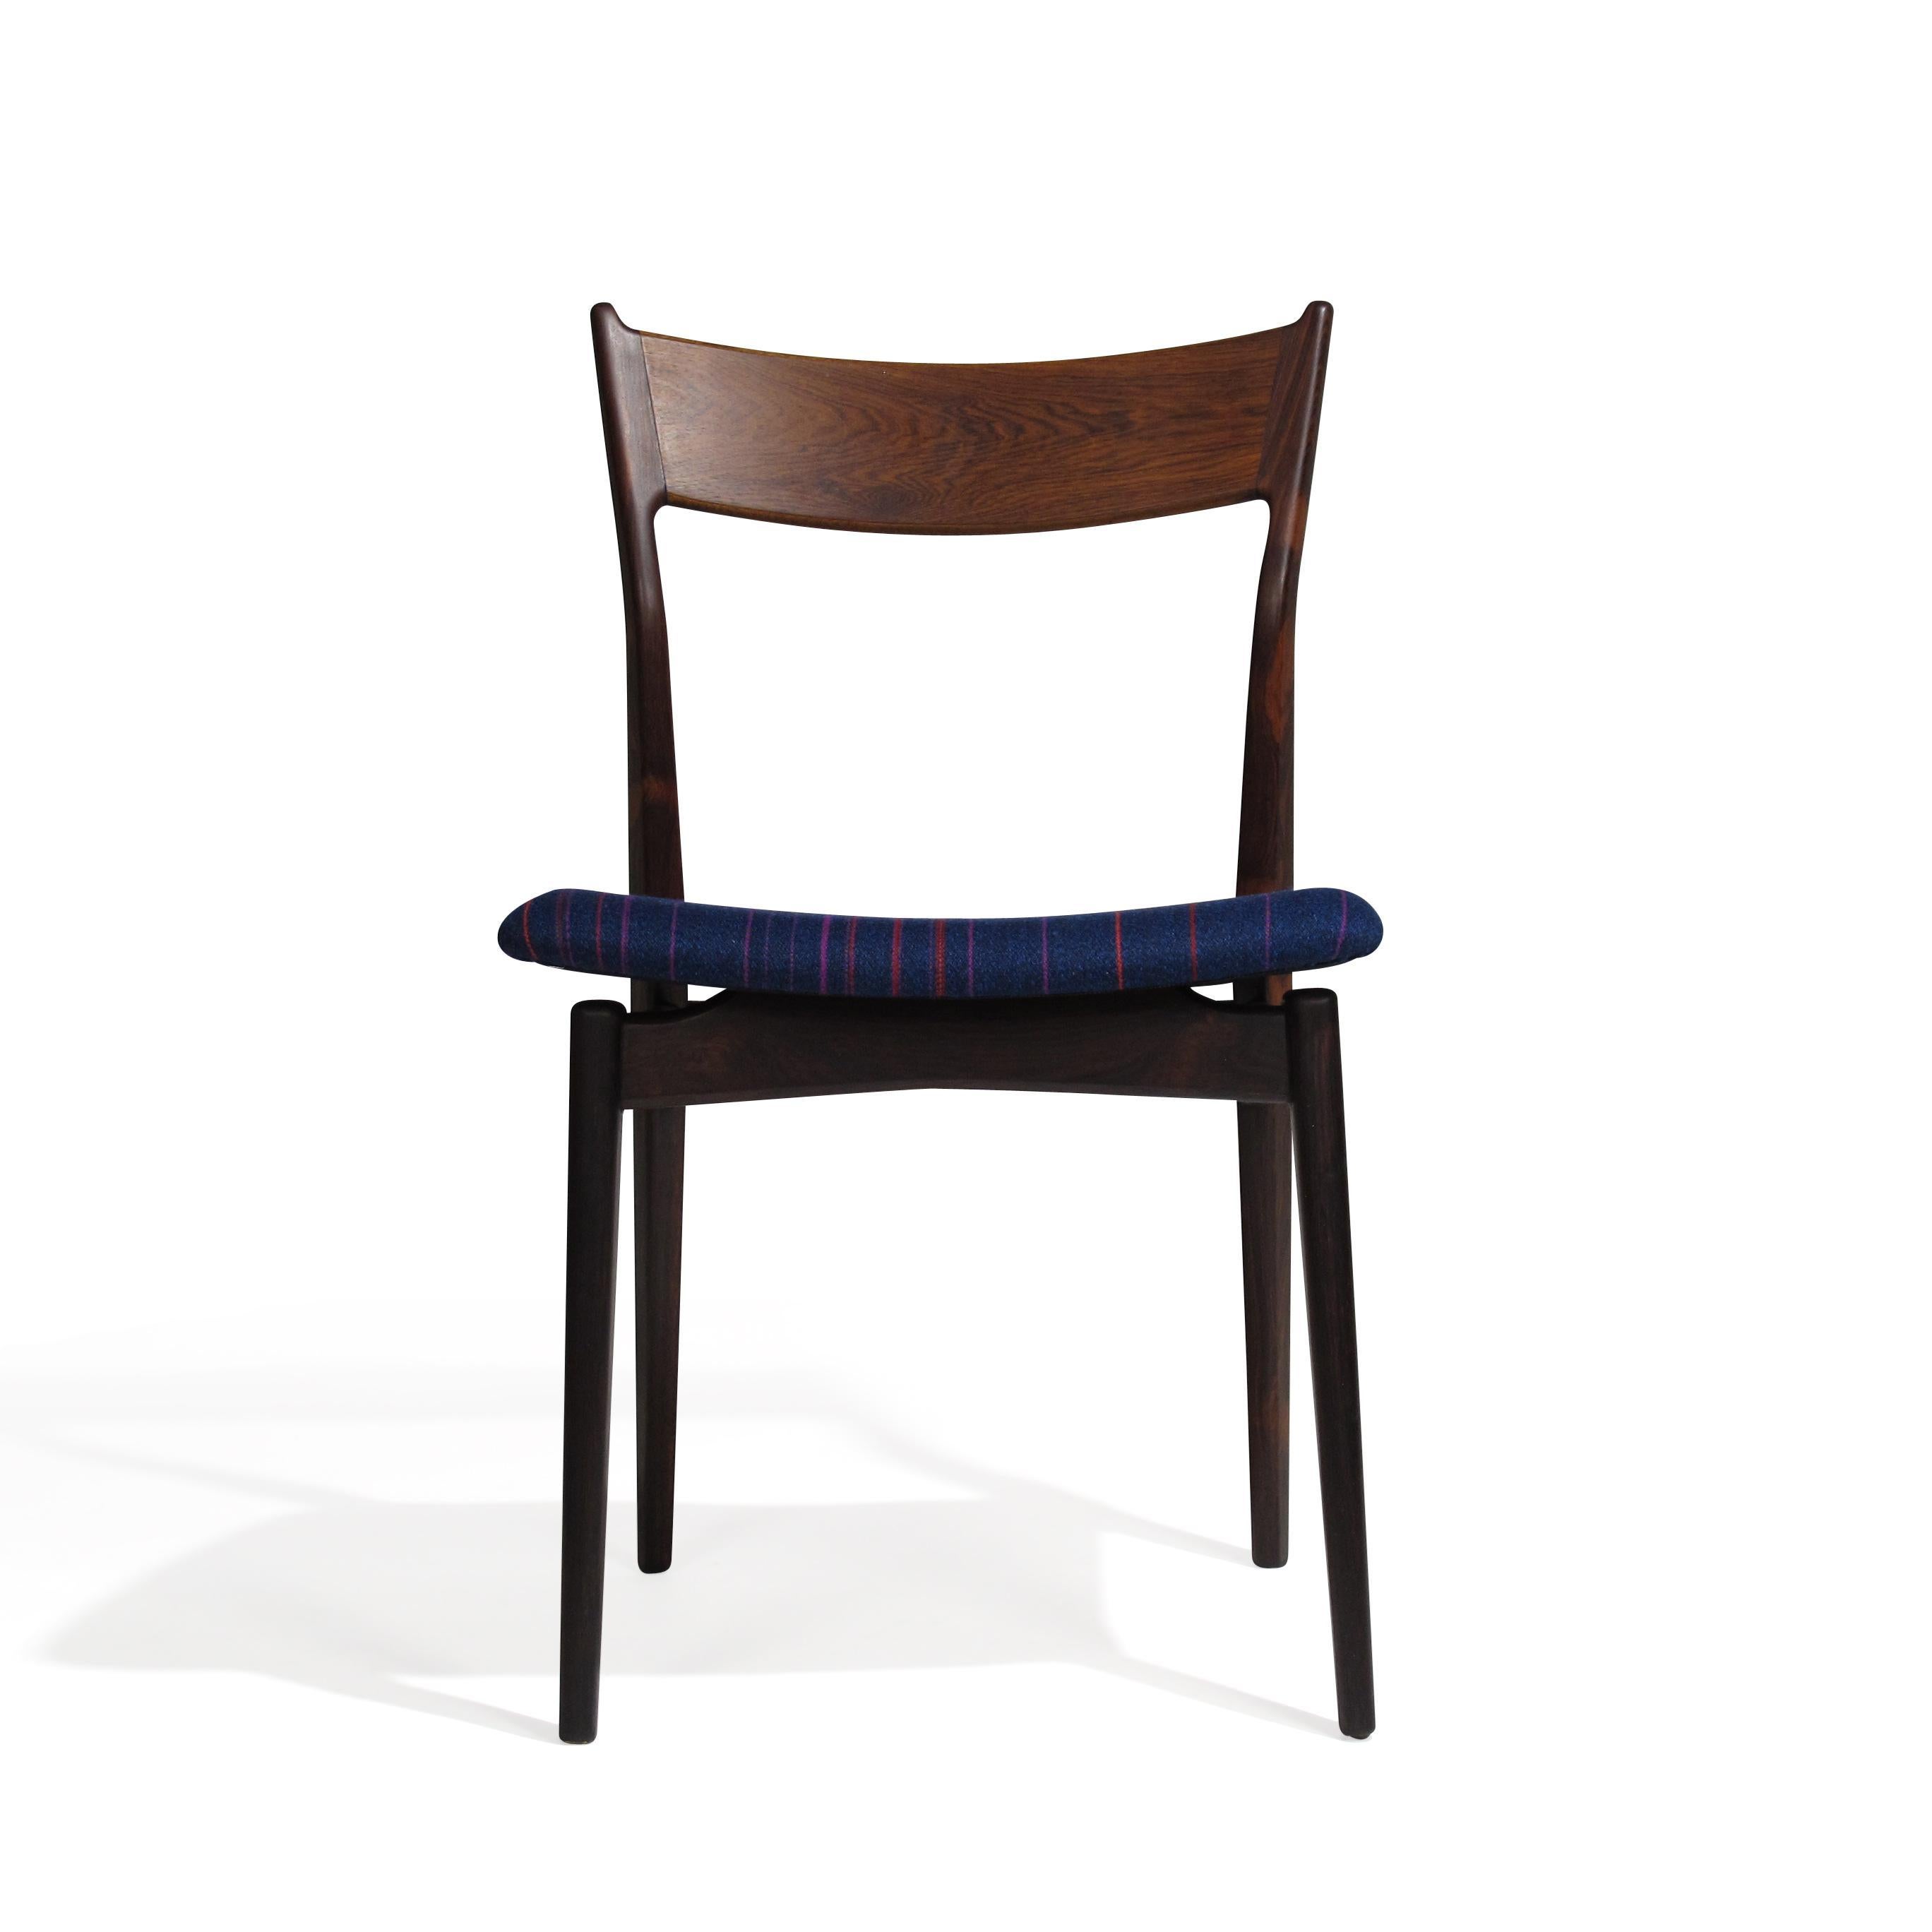 Midcentury Brazilian rosewood dining chairs designed by H.P. Hansen for Randers Mobelfabrik. Handcrafted of solid Brazilian rosewood frames with a sculpted backrest and newly upholstered seats in blue wool textile. The wood used on the frames is of